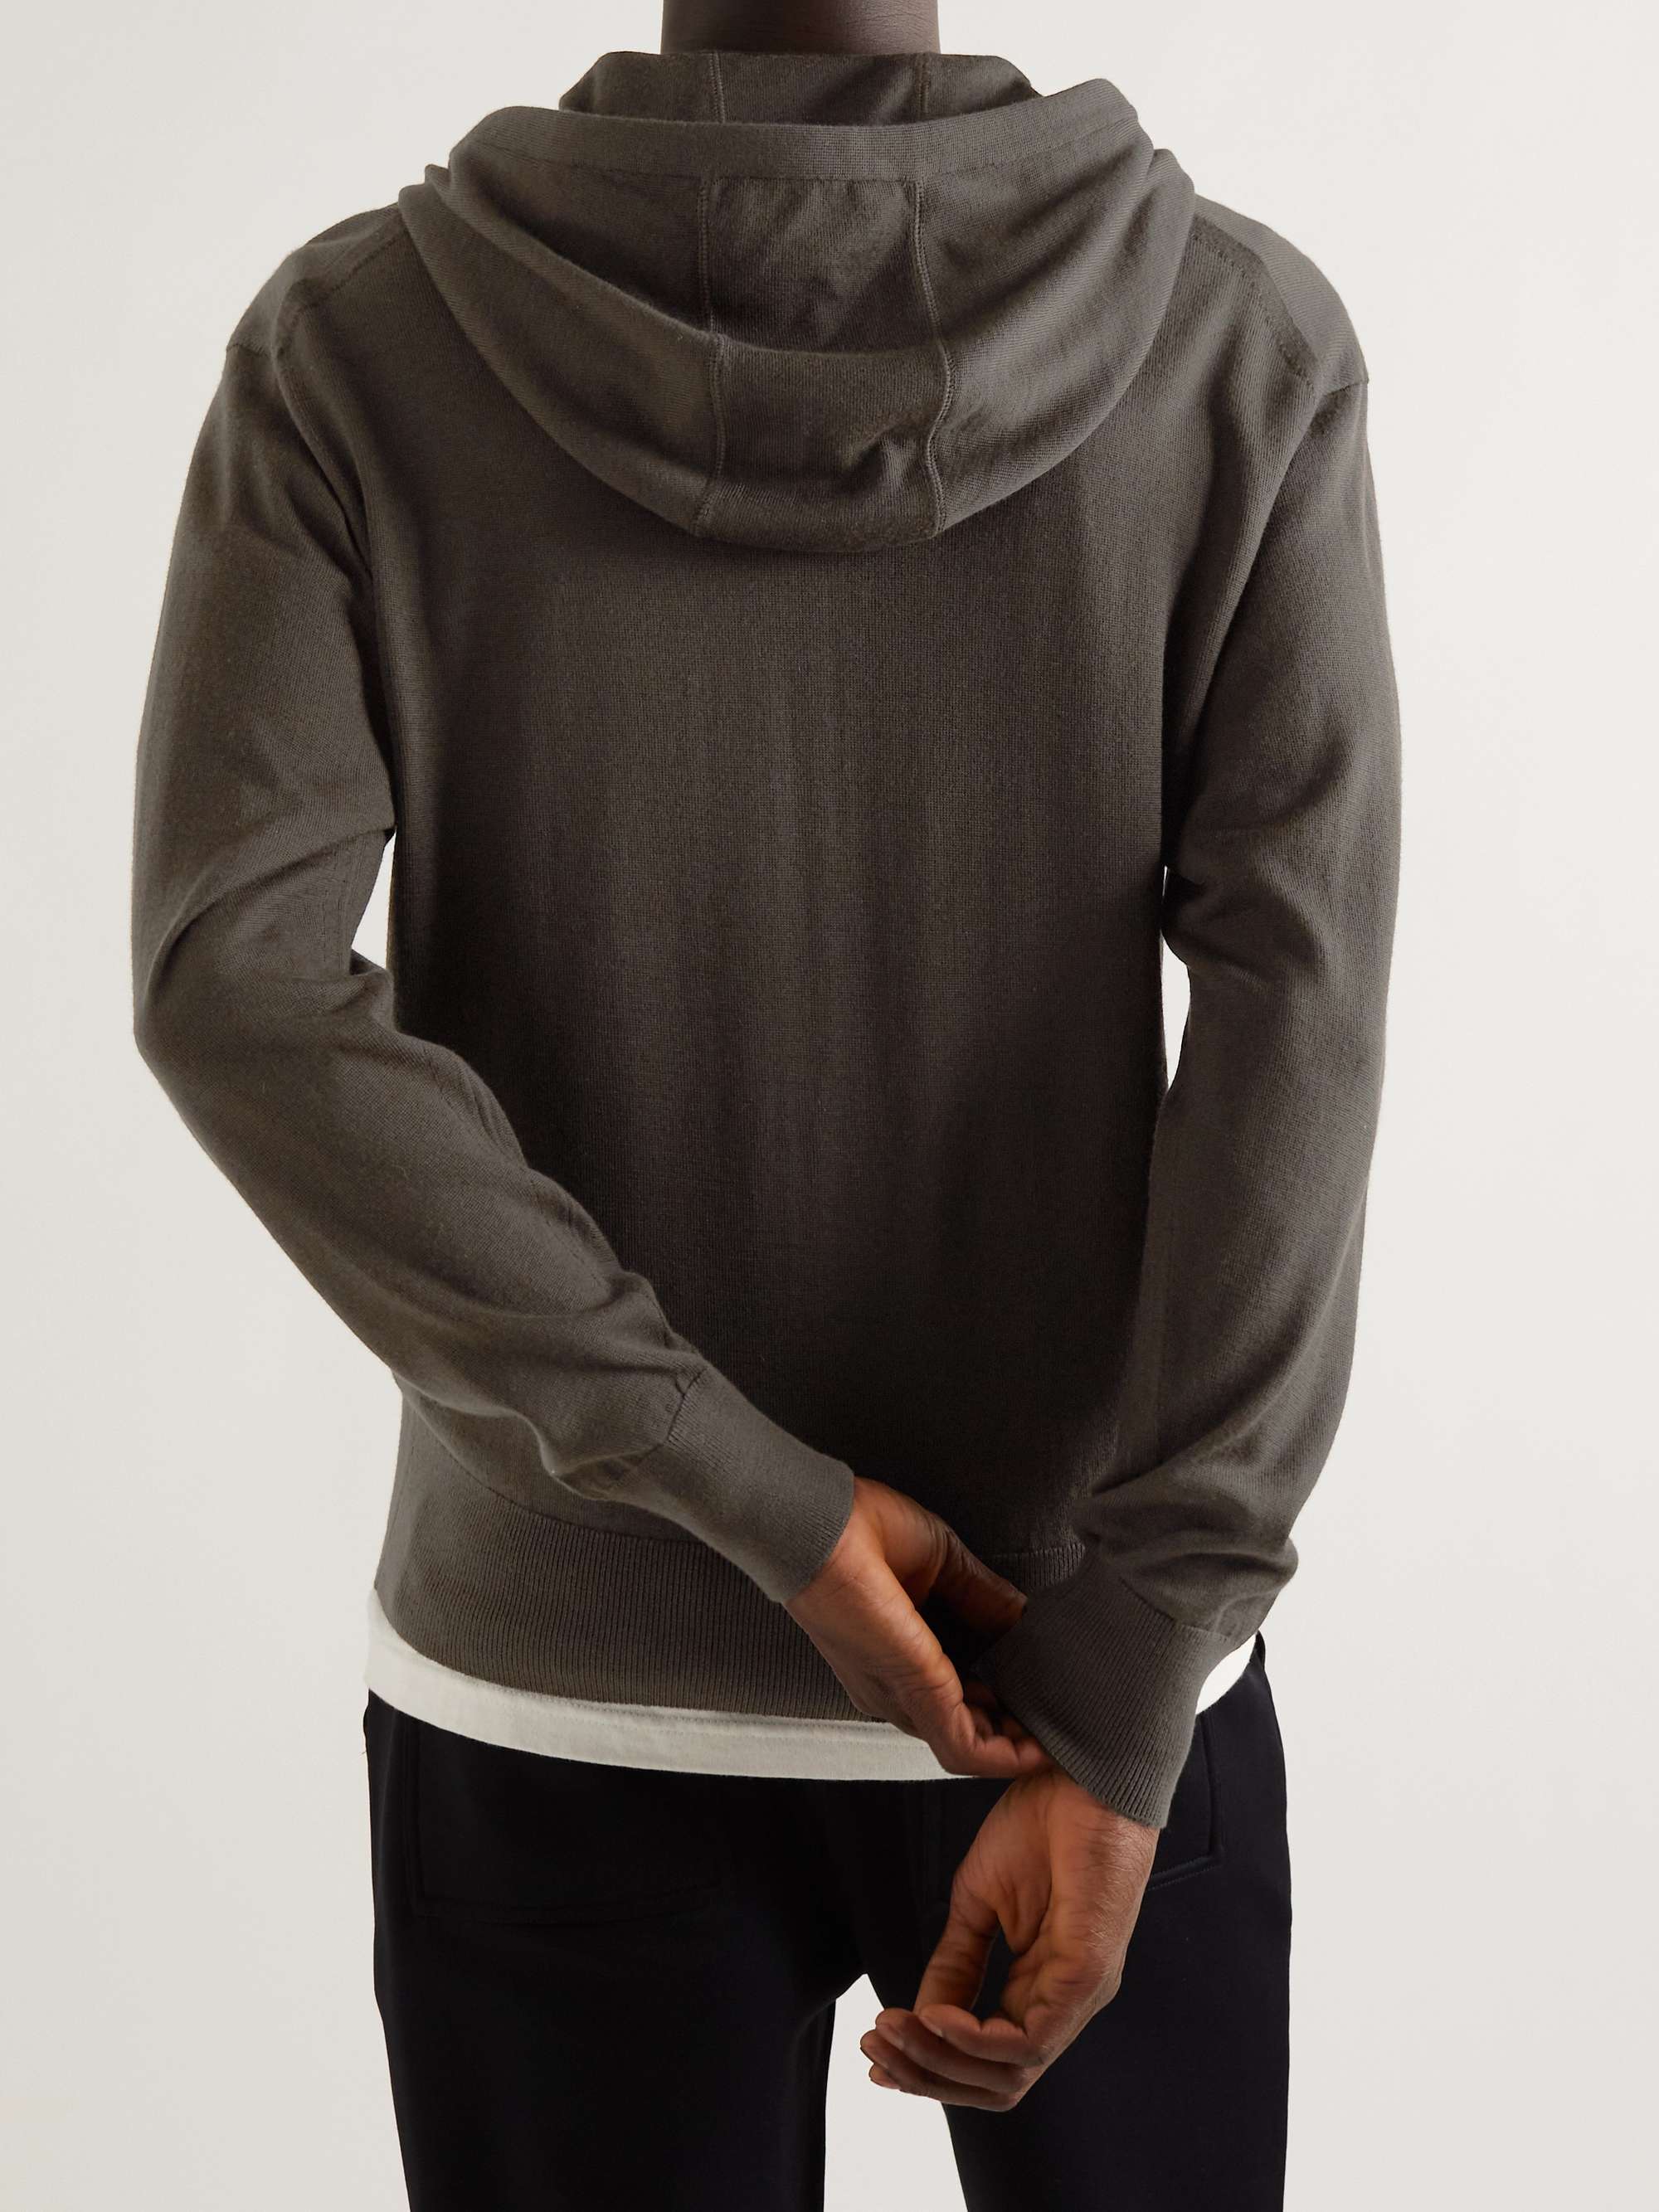 TOM FORD Cashmere-Blend Zip-Up Hoodie